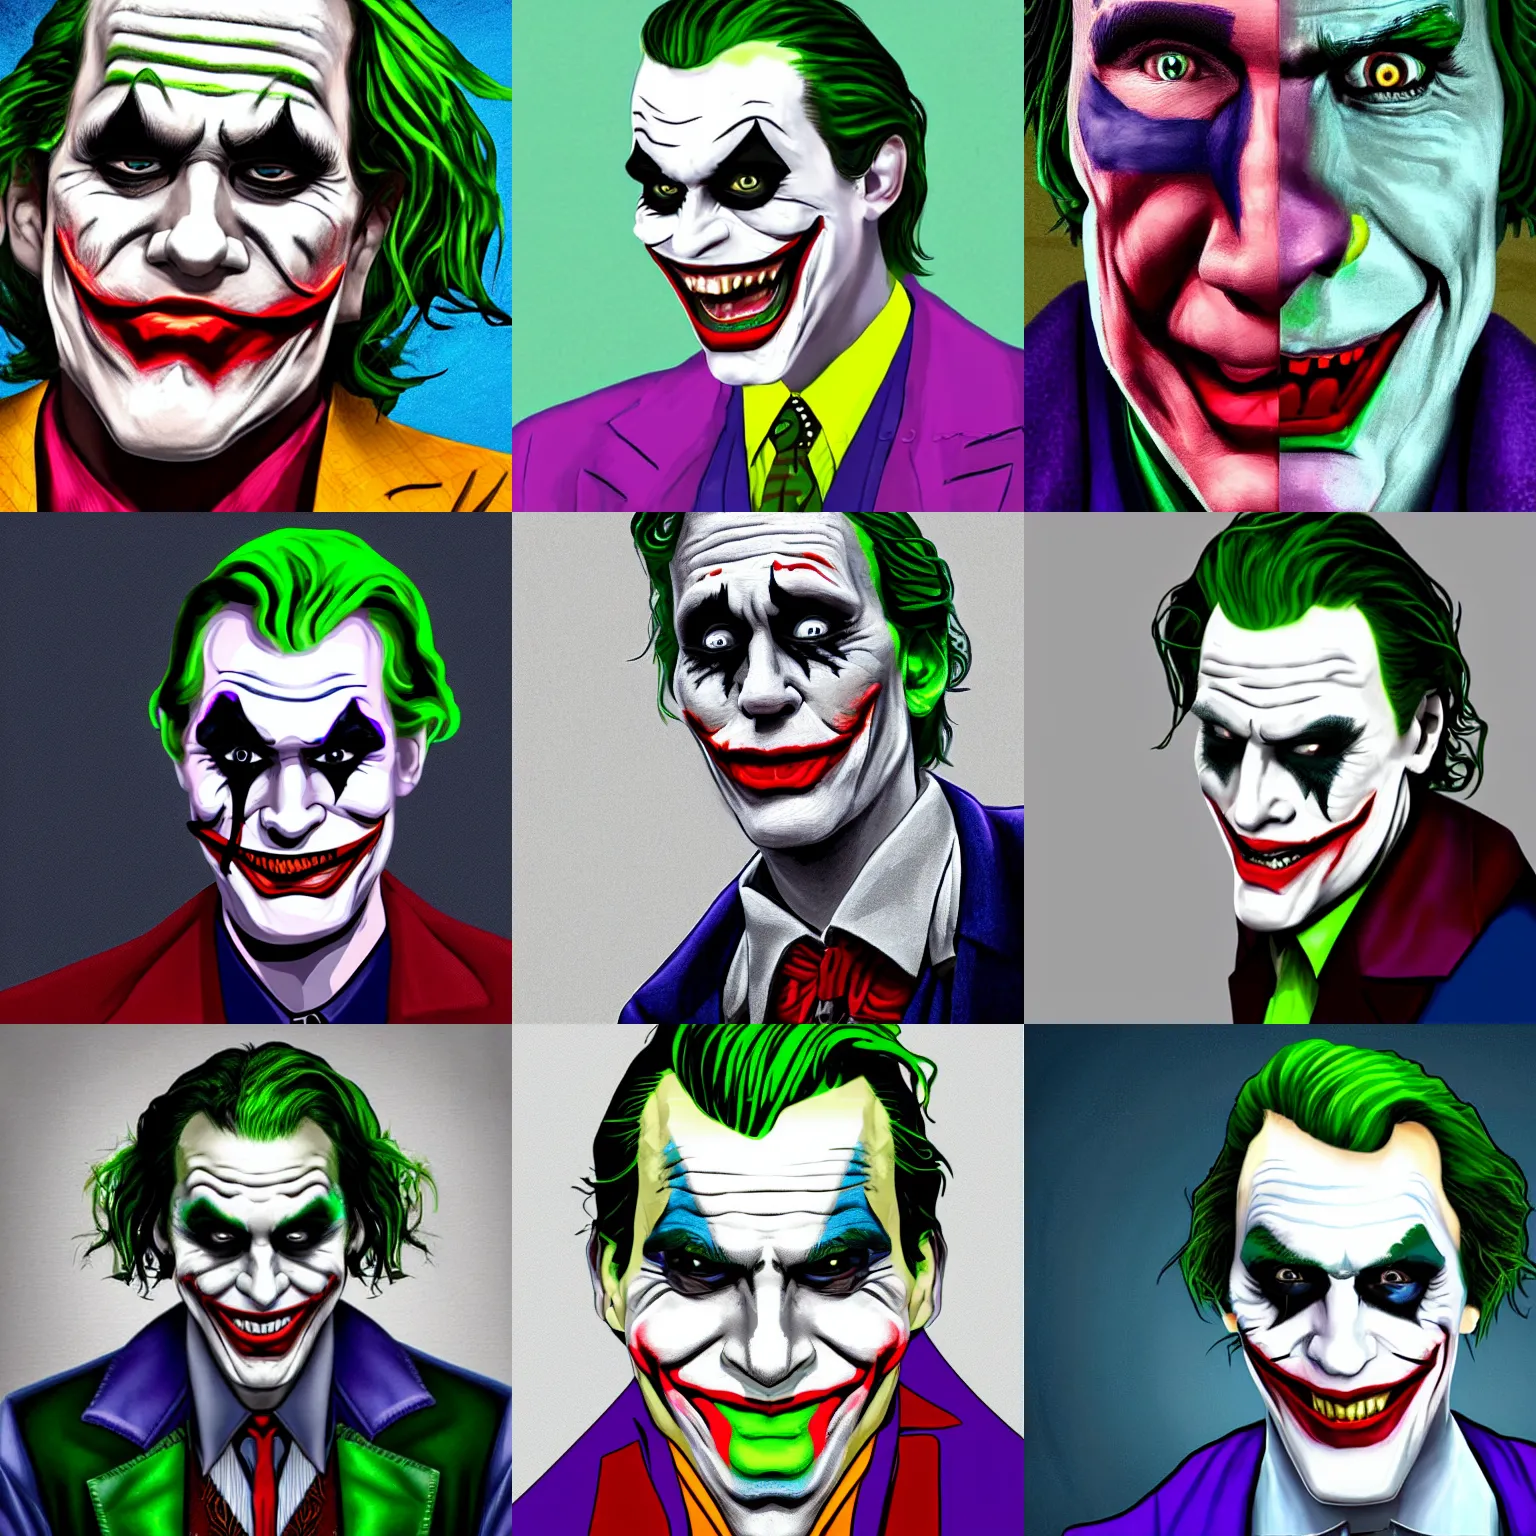 Prompt: portrait of streamer jerma985 as the joker, high quality